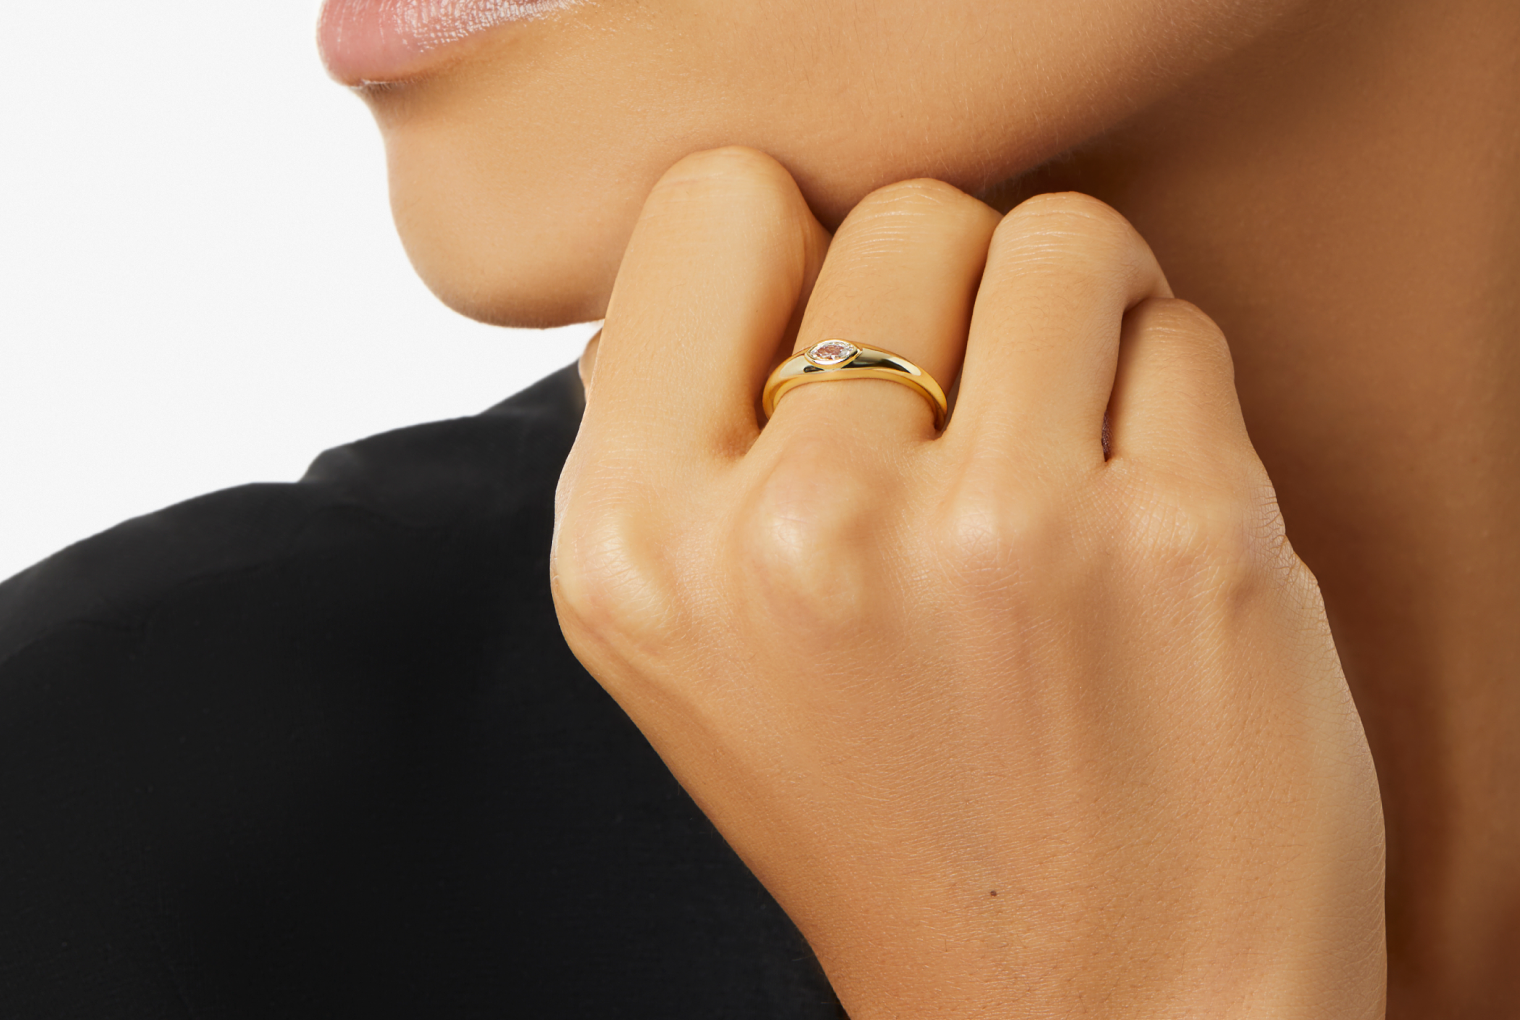 woman wearing a gold solitaire ring with gemstones